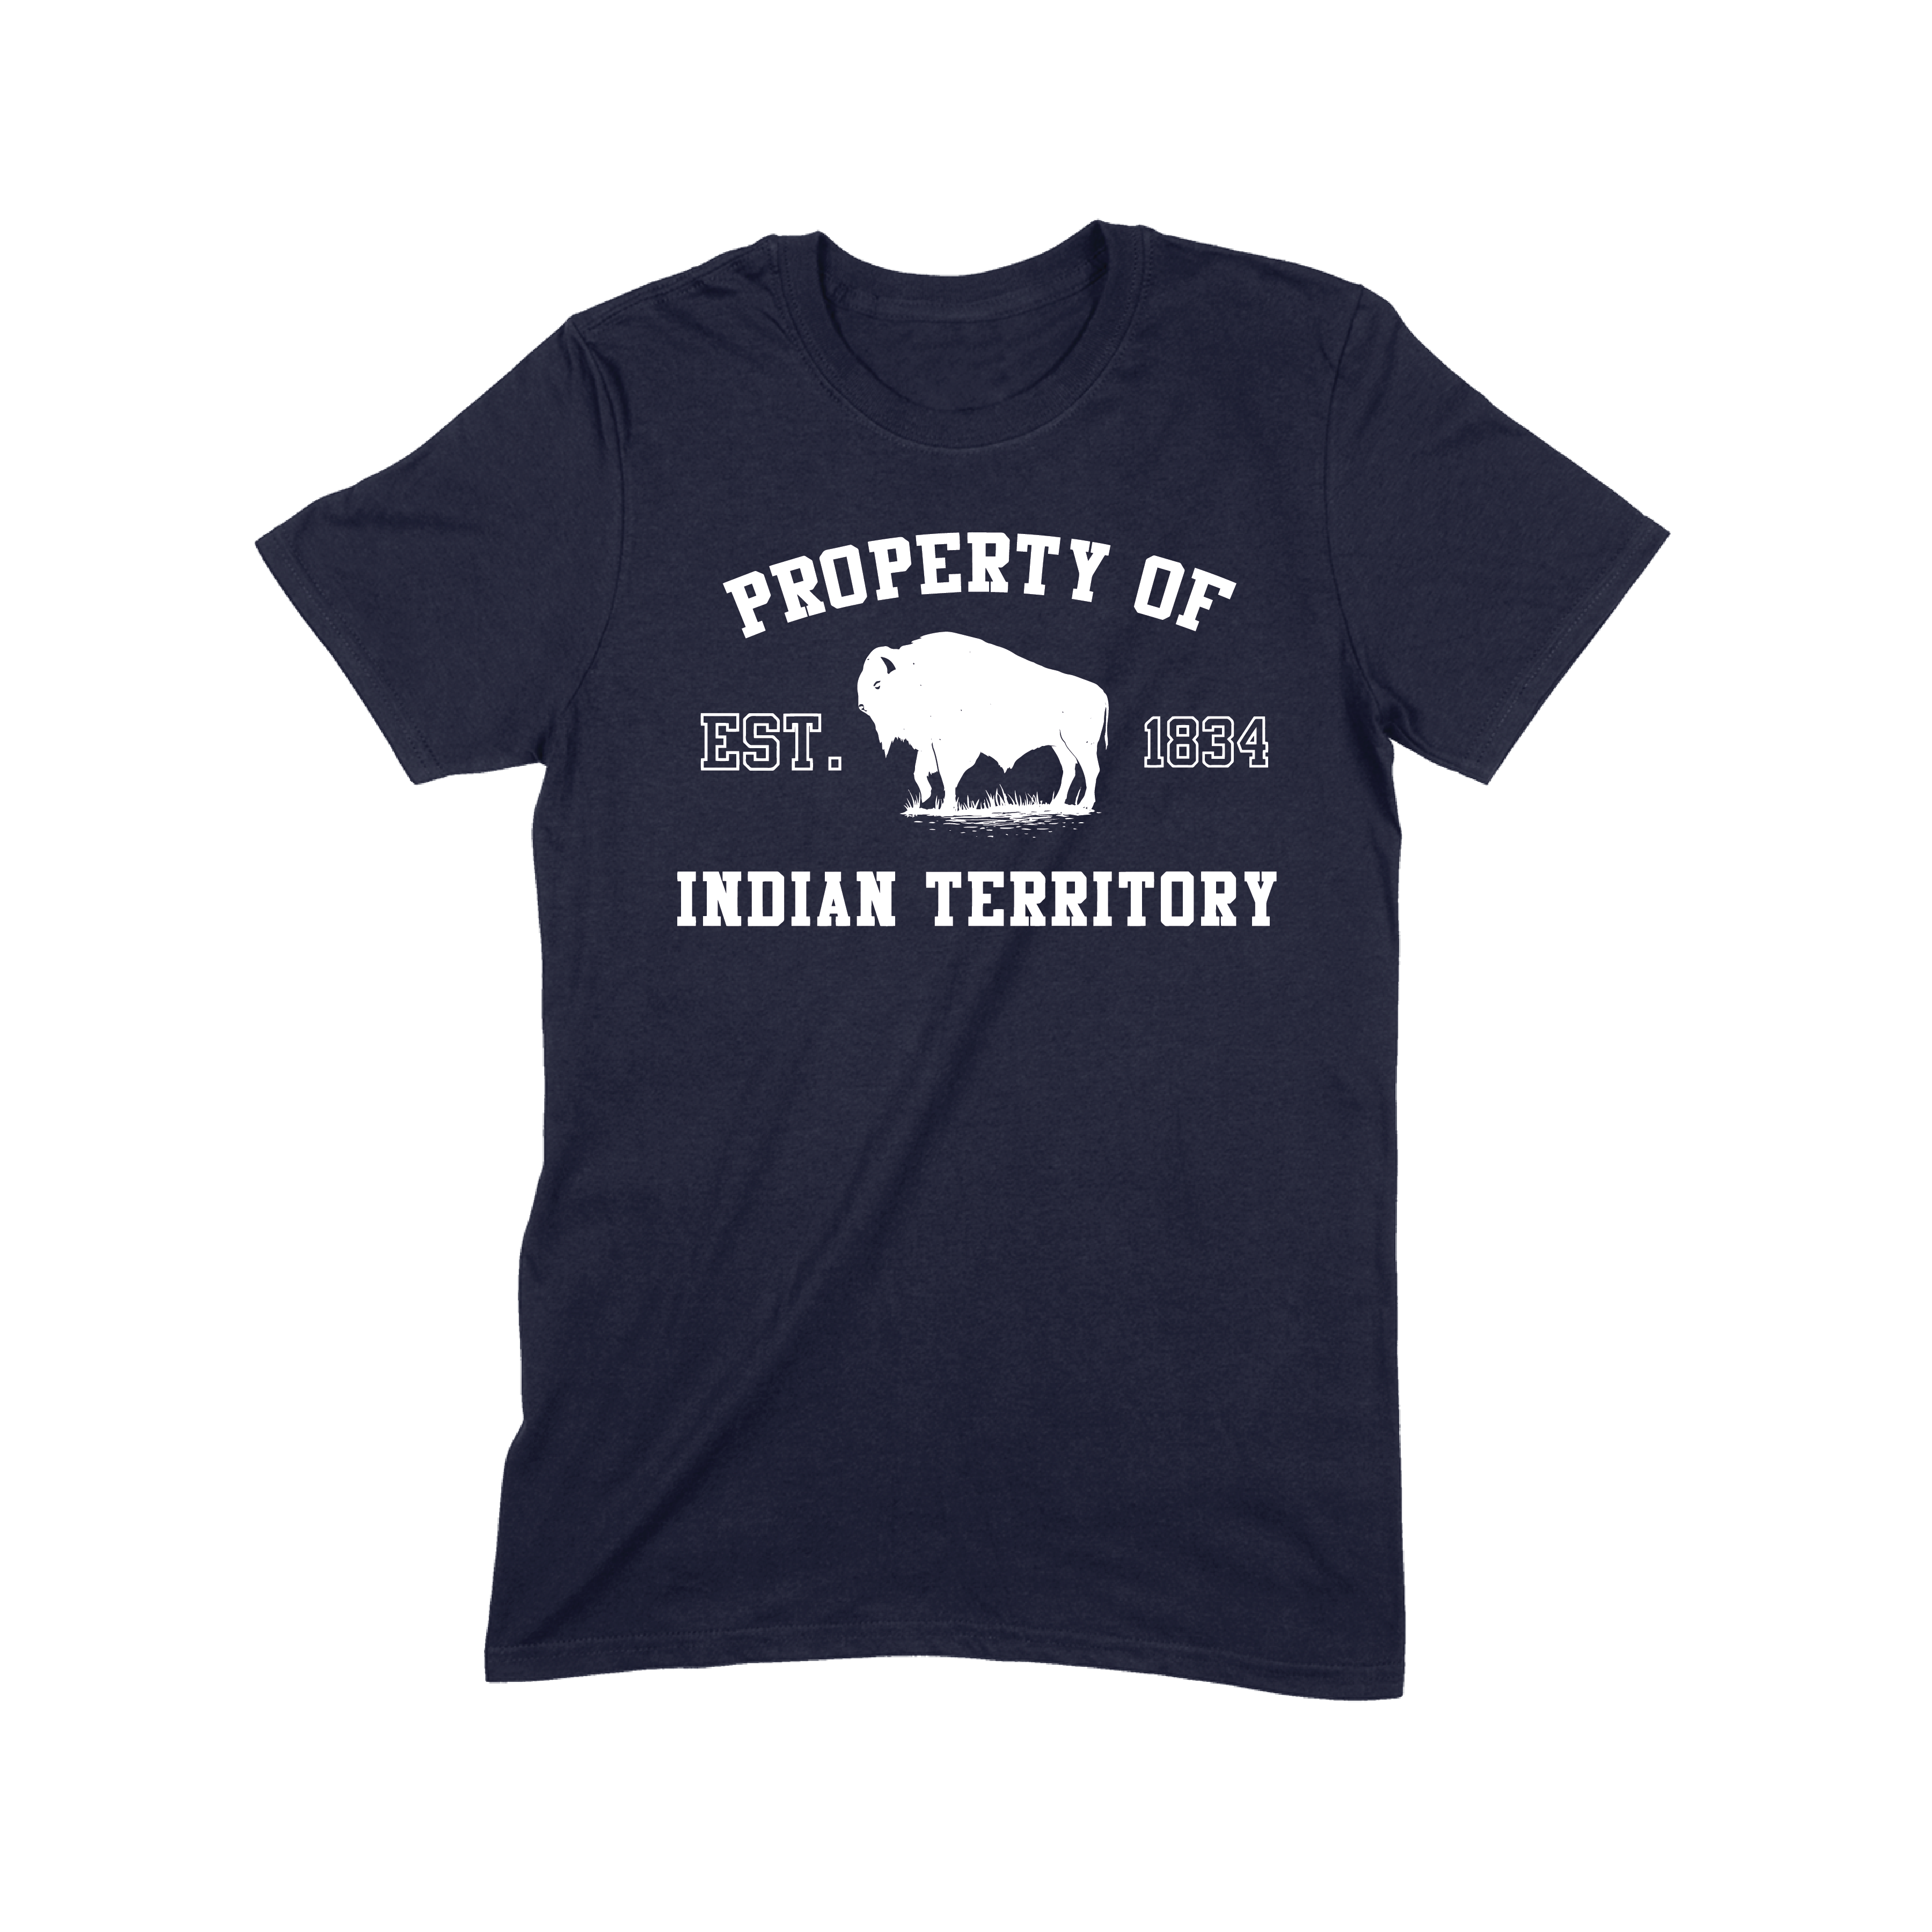 Property of Indian Territory -Navy/Short sleeve